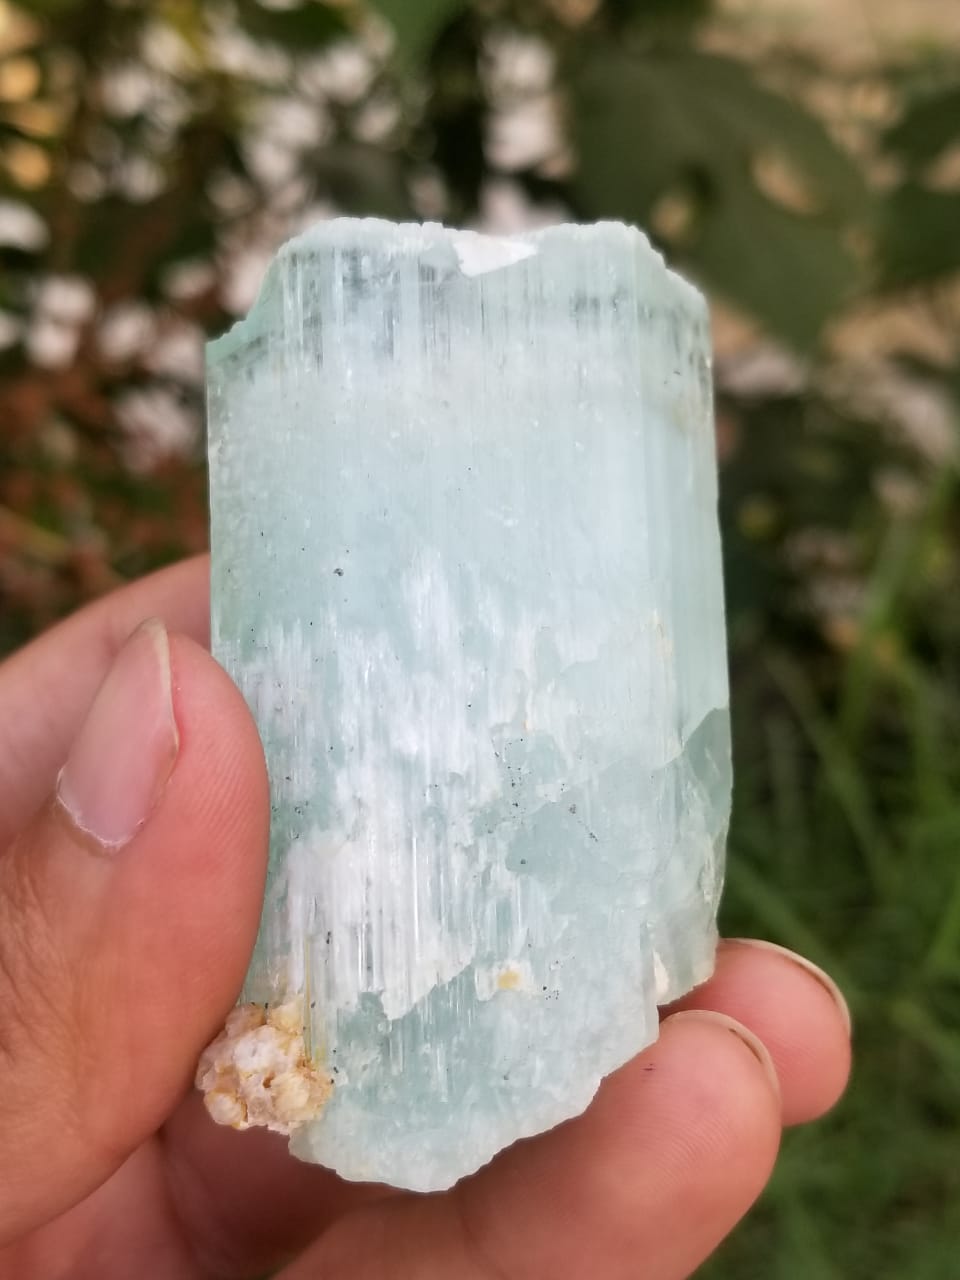 Aquamarine crystal from Pakistan available for sale